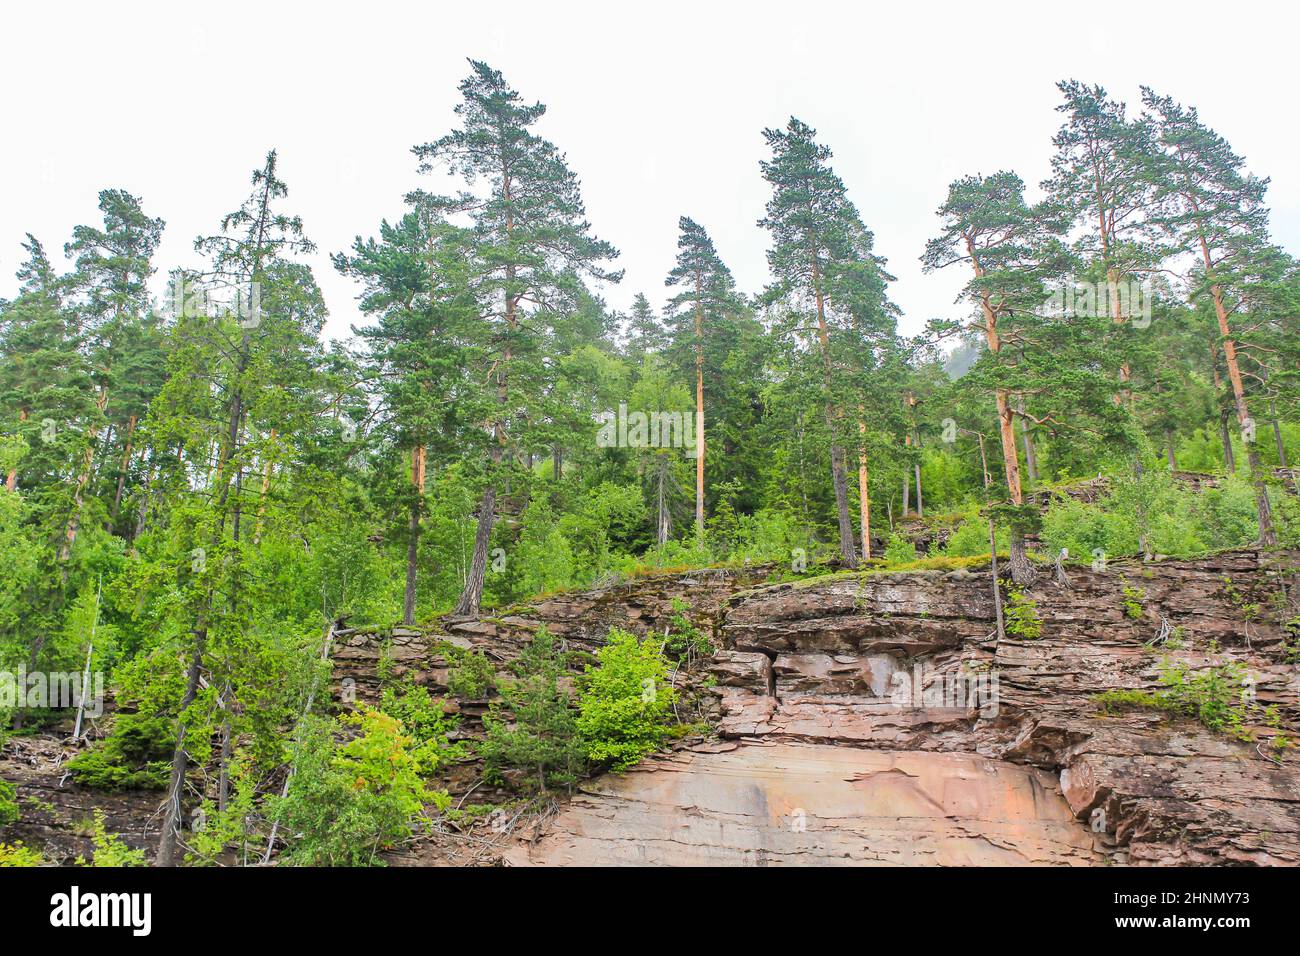 Norwegian landscape with trees firs mountains and rocks. Norway Nature. Stock Photo